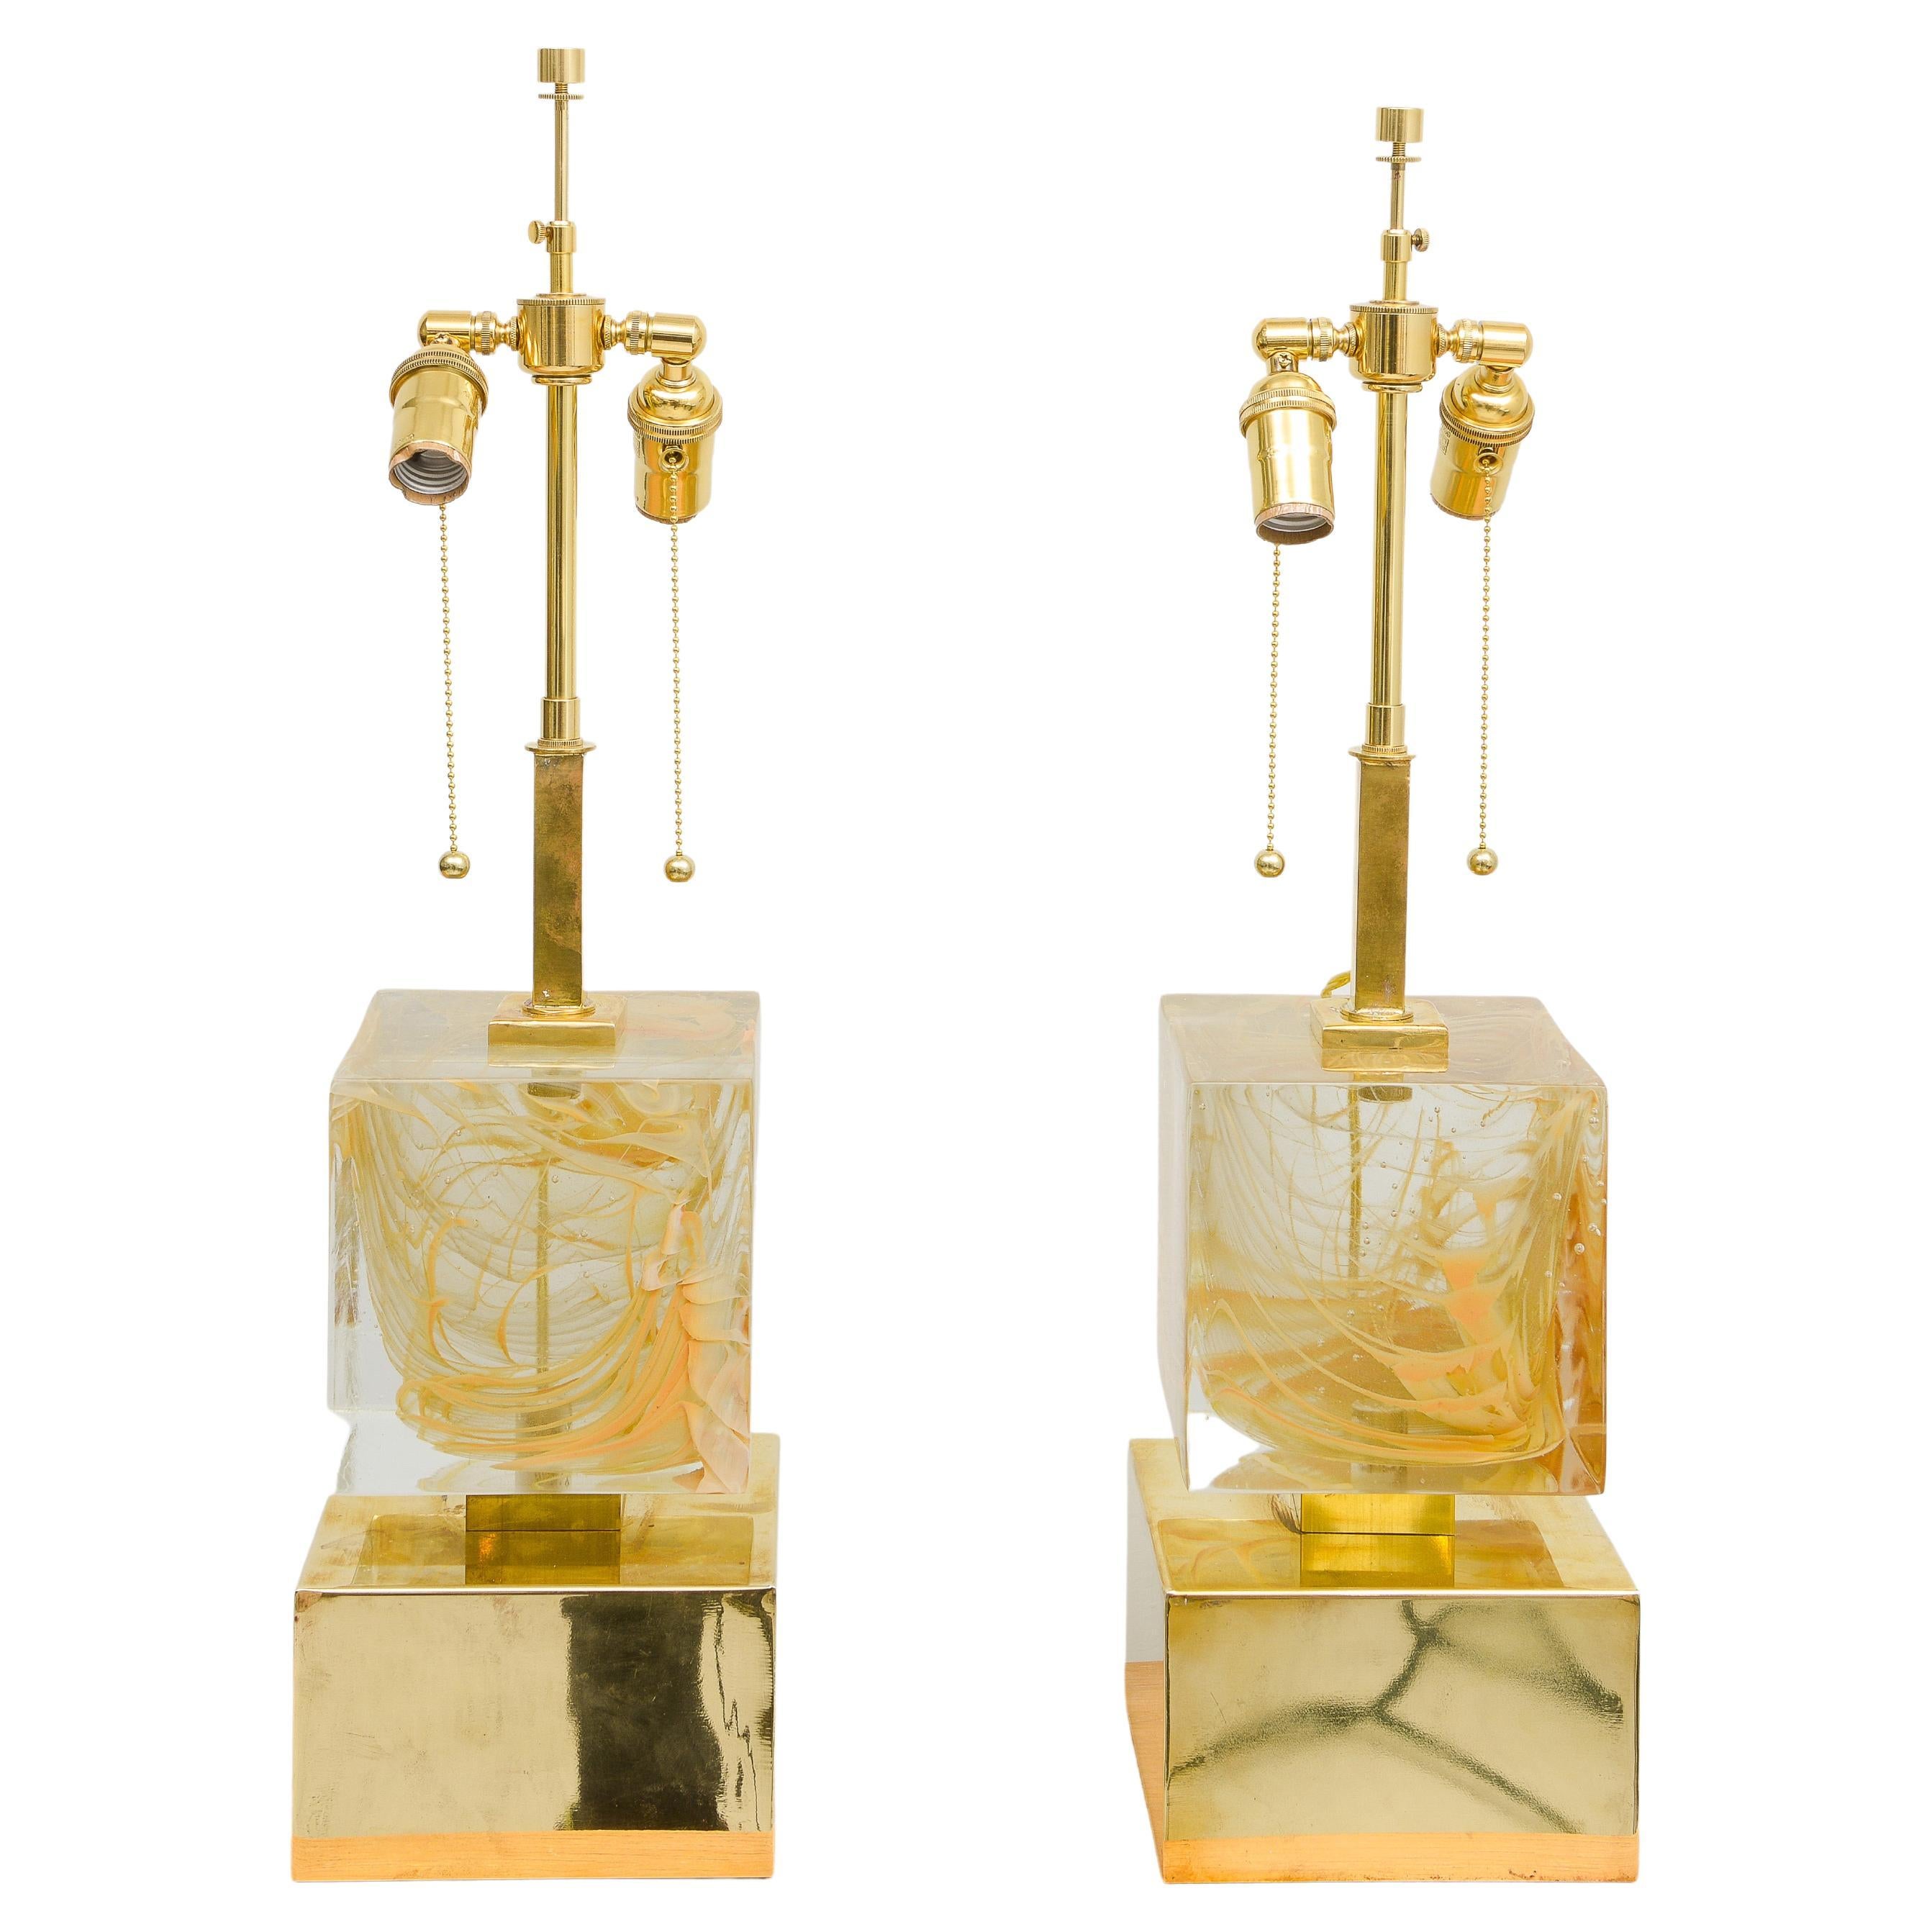 Bespoke Pair of Sculptural Murano Glass Lamps on Brass Base